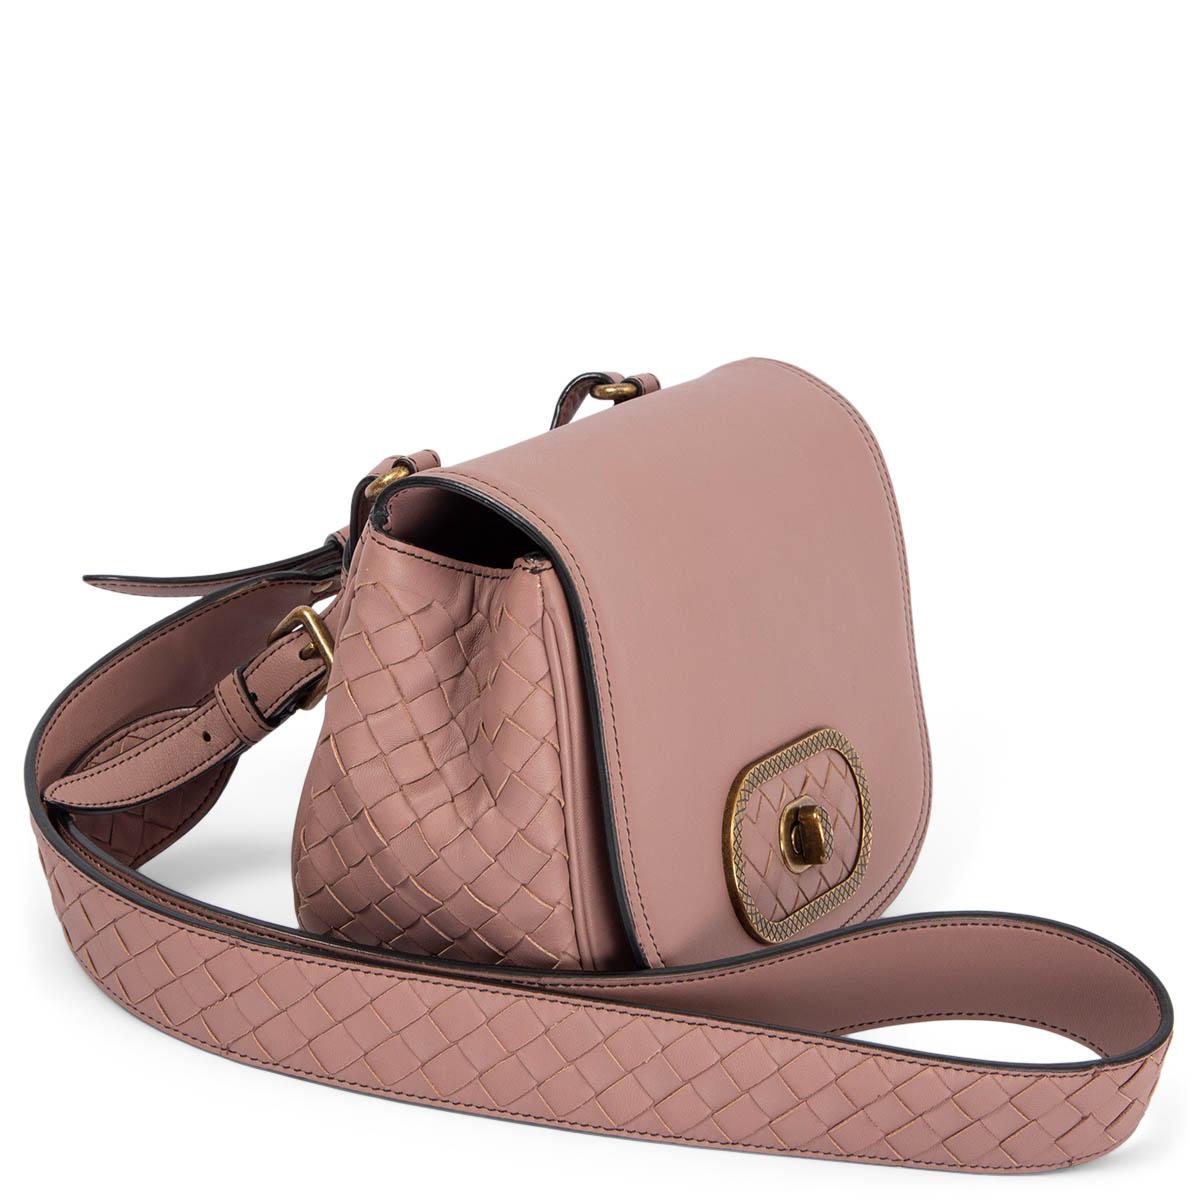 100% authentic Bottega Veneta Intrecciato Luna shoulder bag in dusty pink nappa leather featuring antique gold-tone harware. Opens with a flap and turn-lock to a taupe microfibre lined interior with one open pocket under the flap. Has been carried